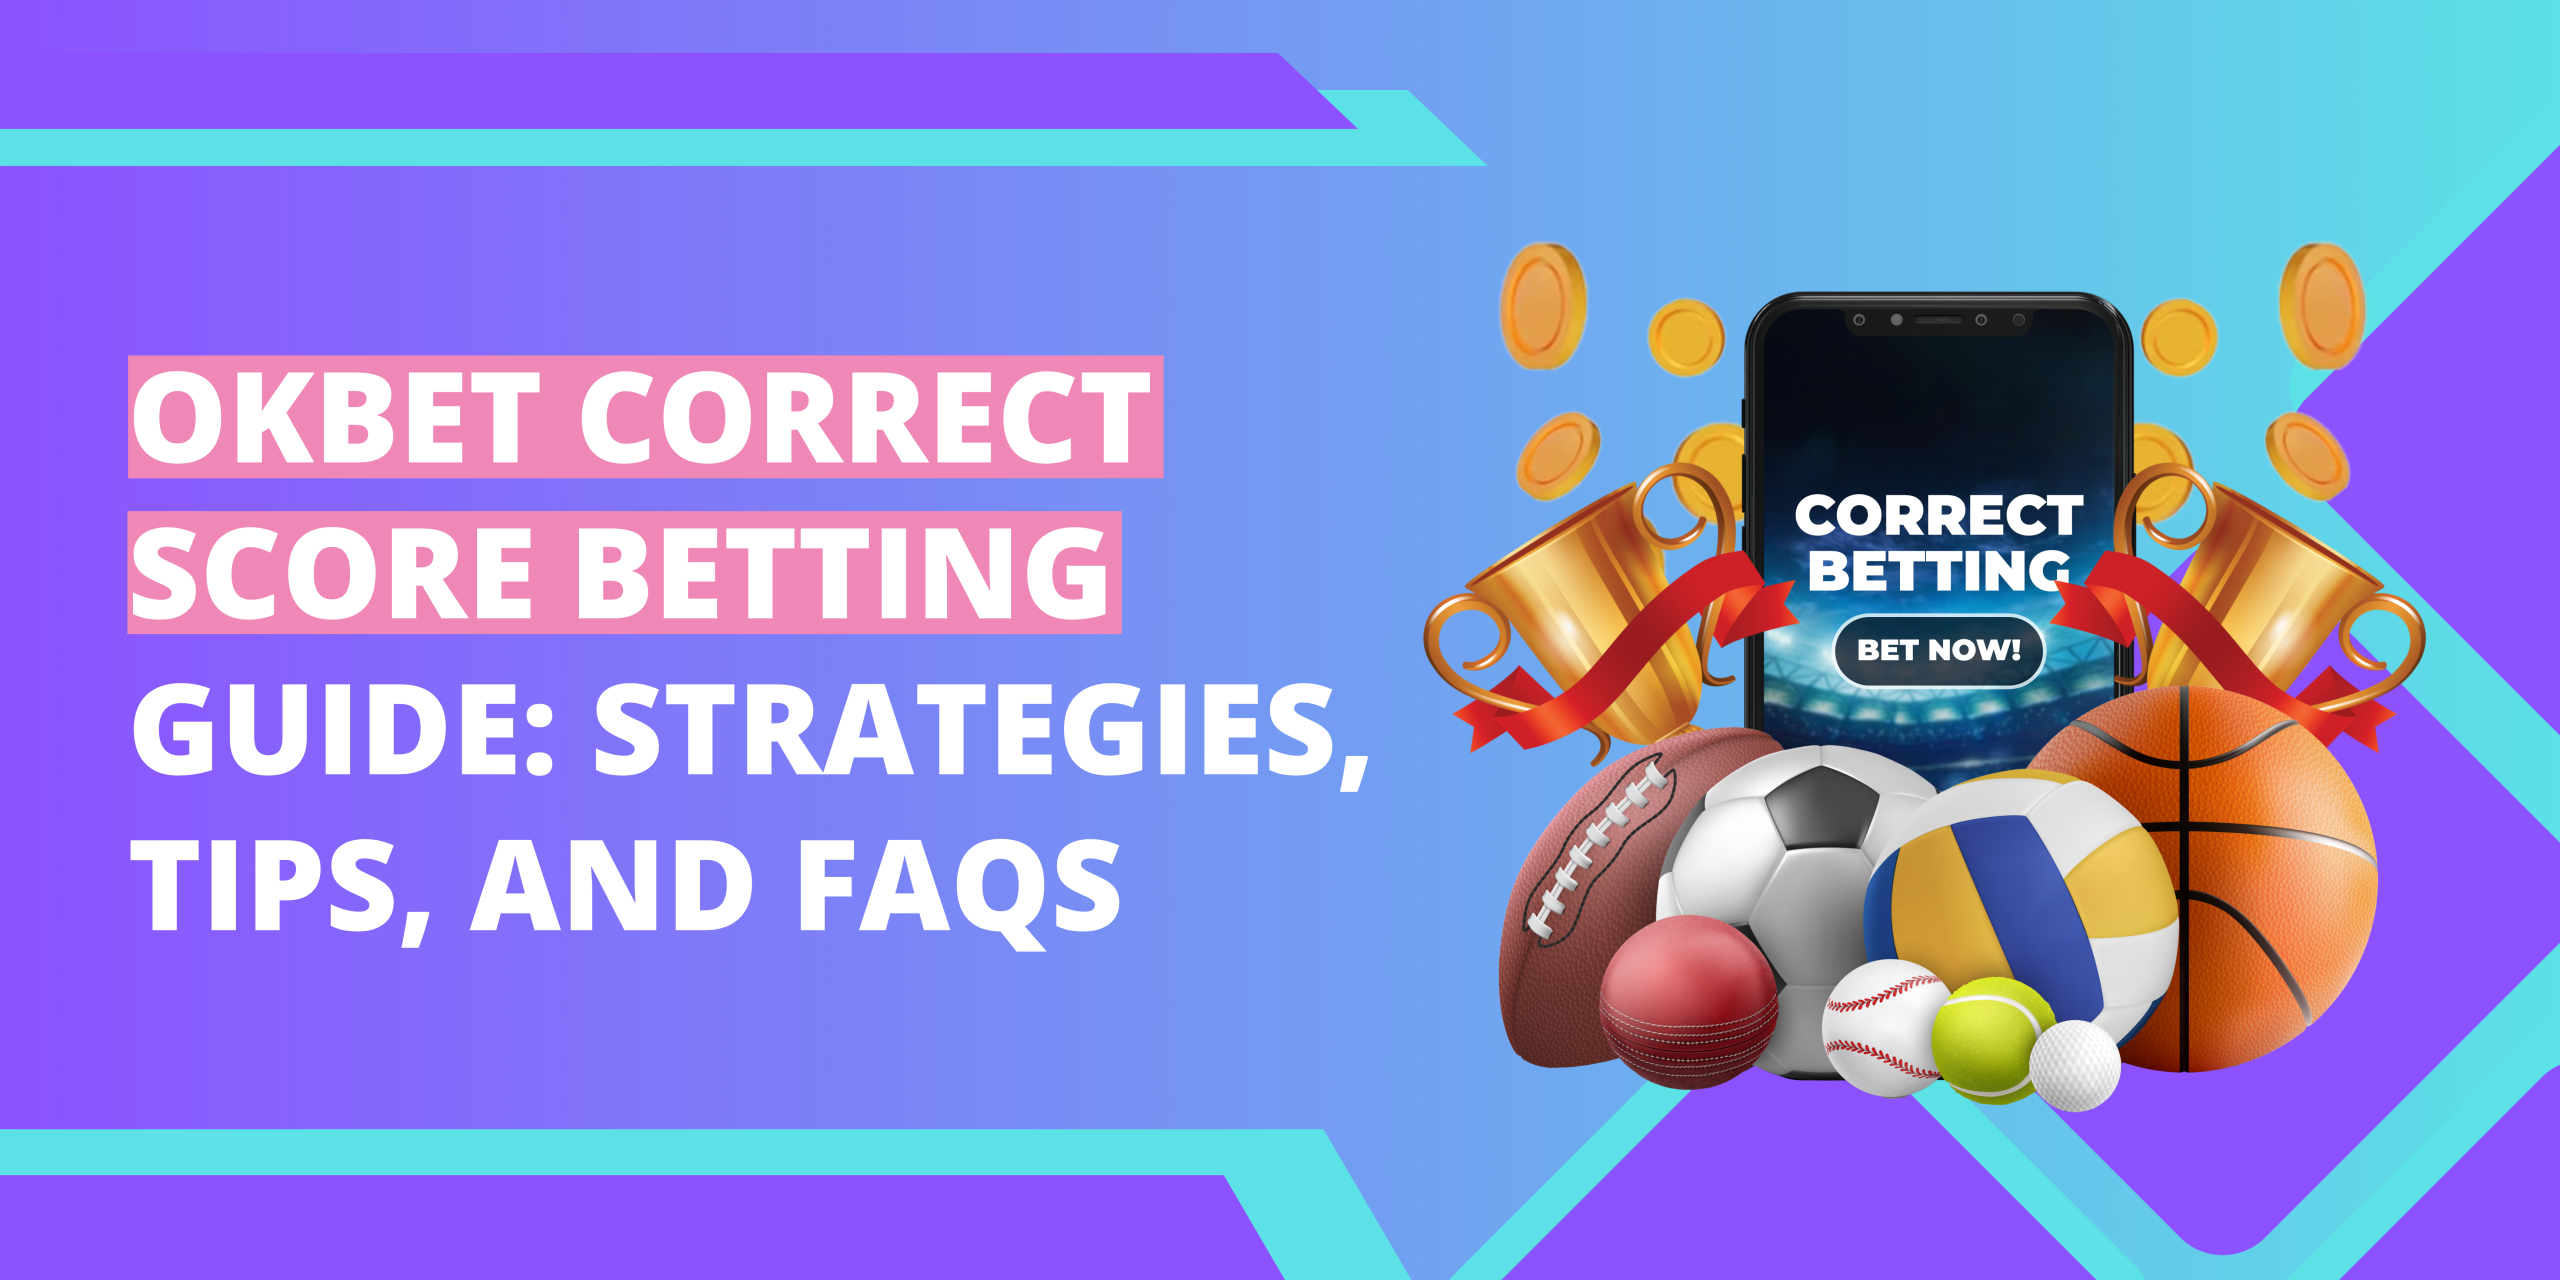 OKBet Correct Score Betting Guide: Strategies, Tips, and FAQs